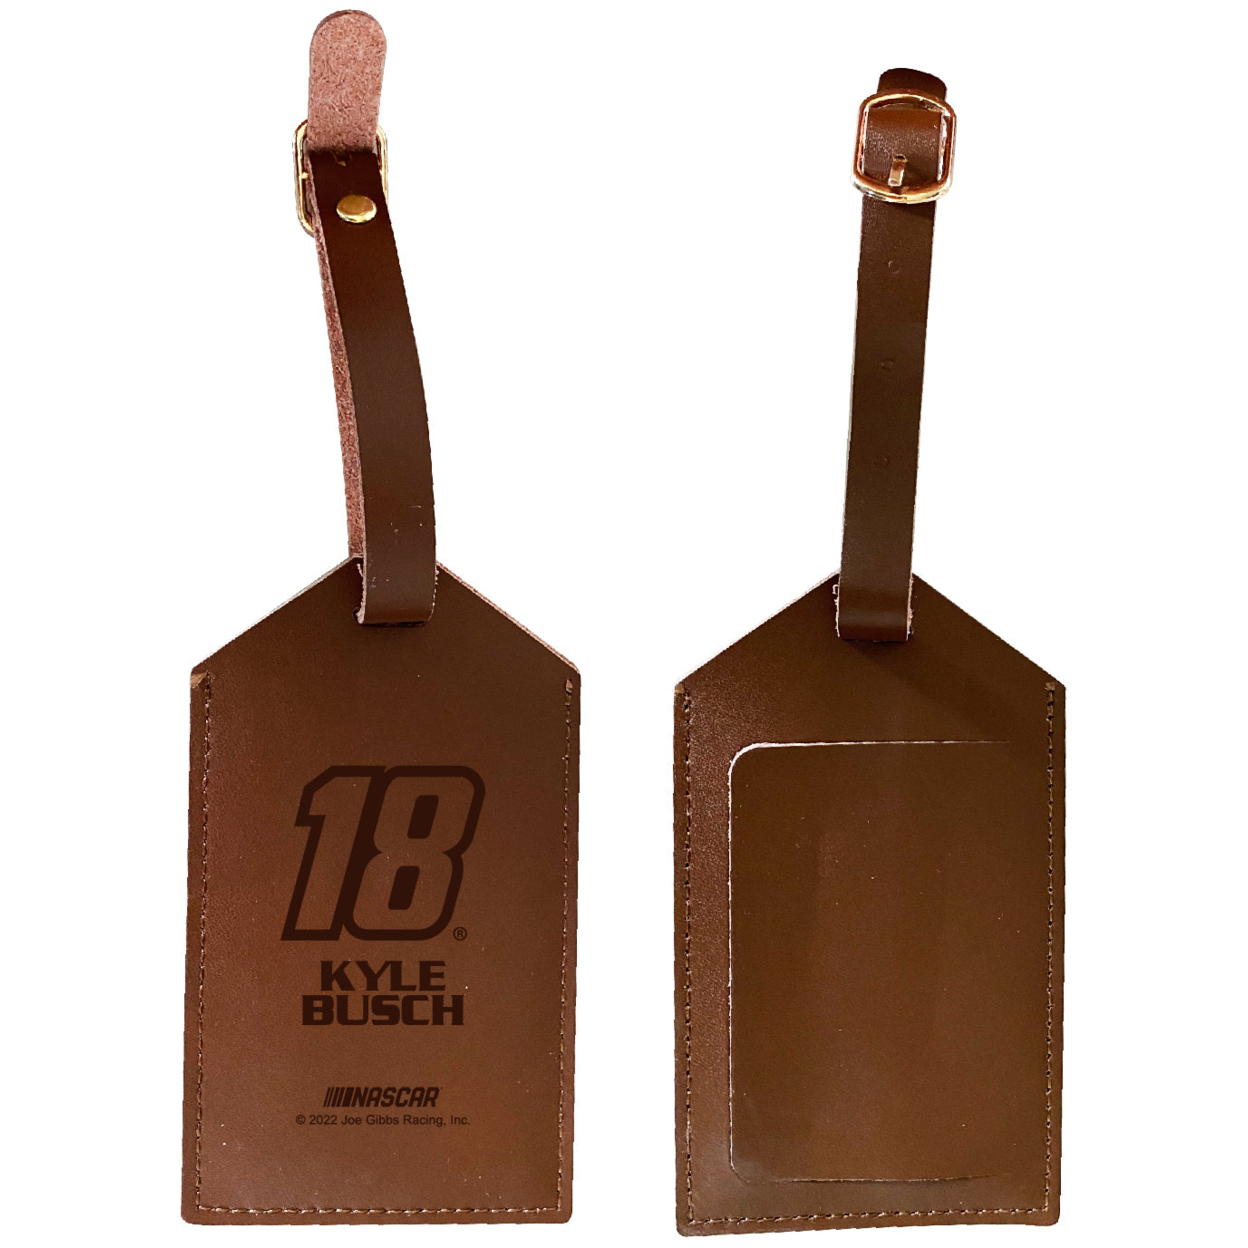 Nascar #18 Kyle Busch Leather Luggage Tag Engraved